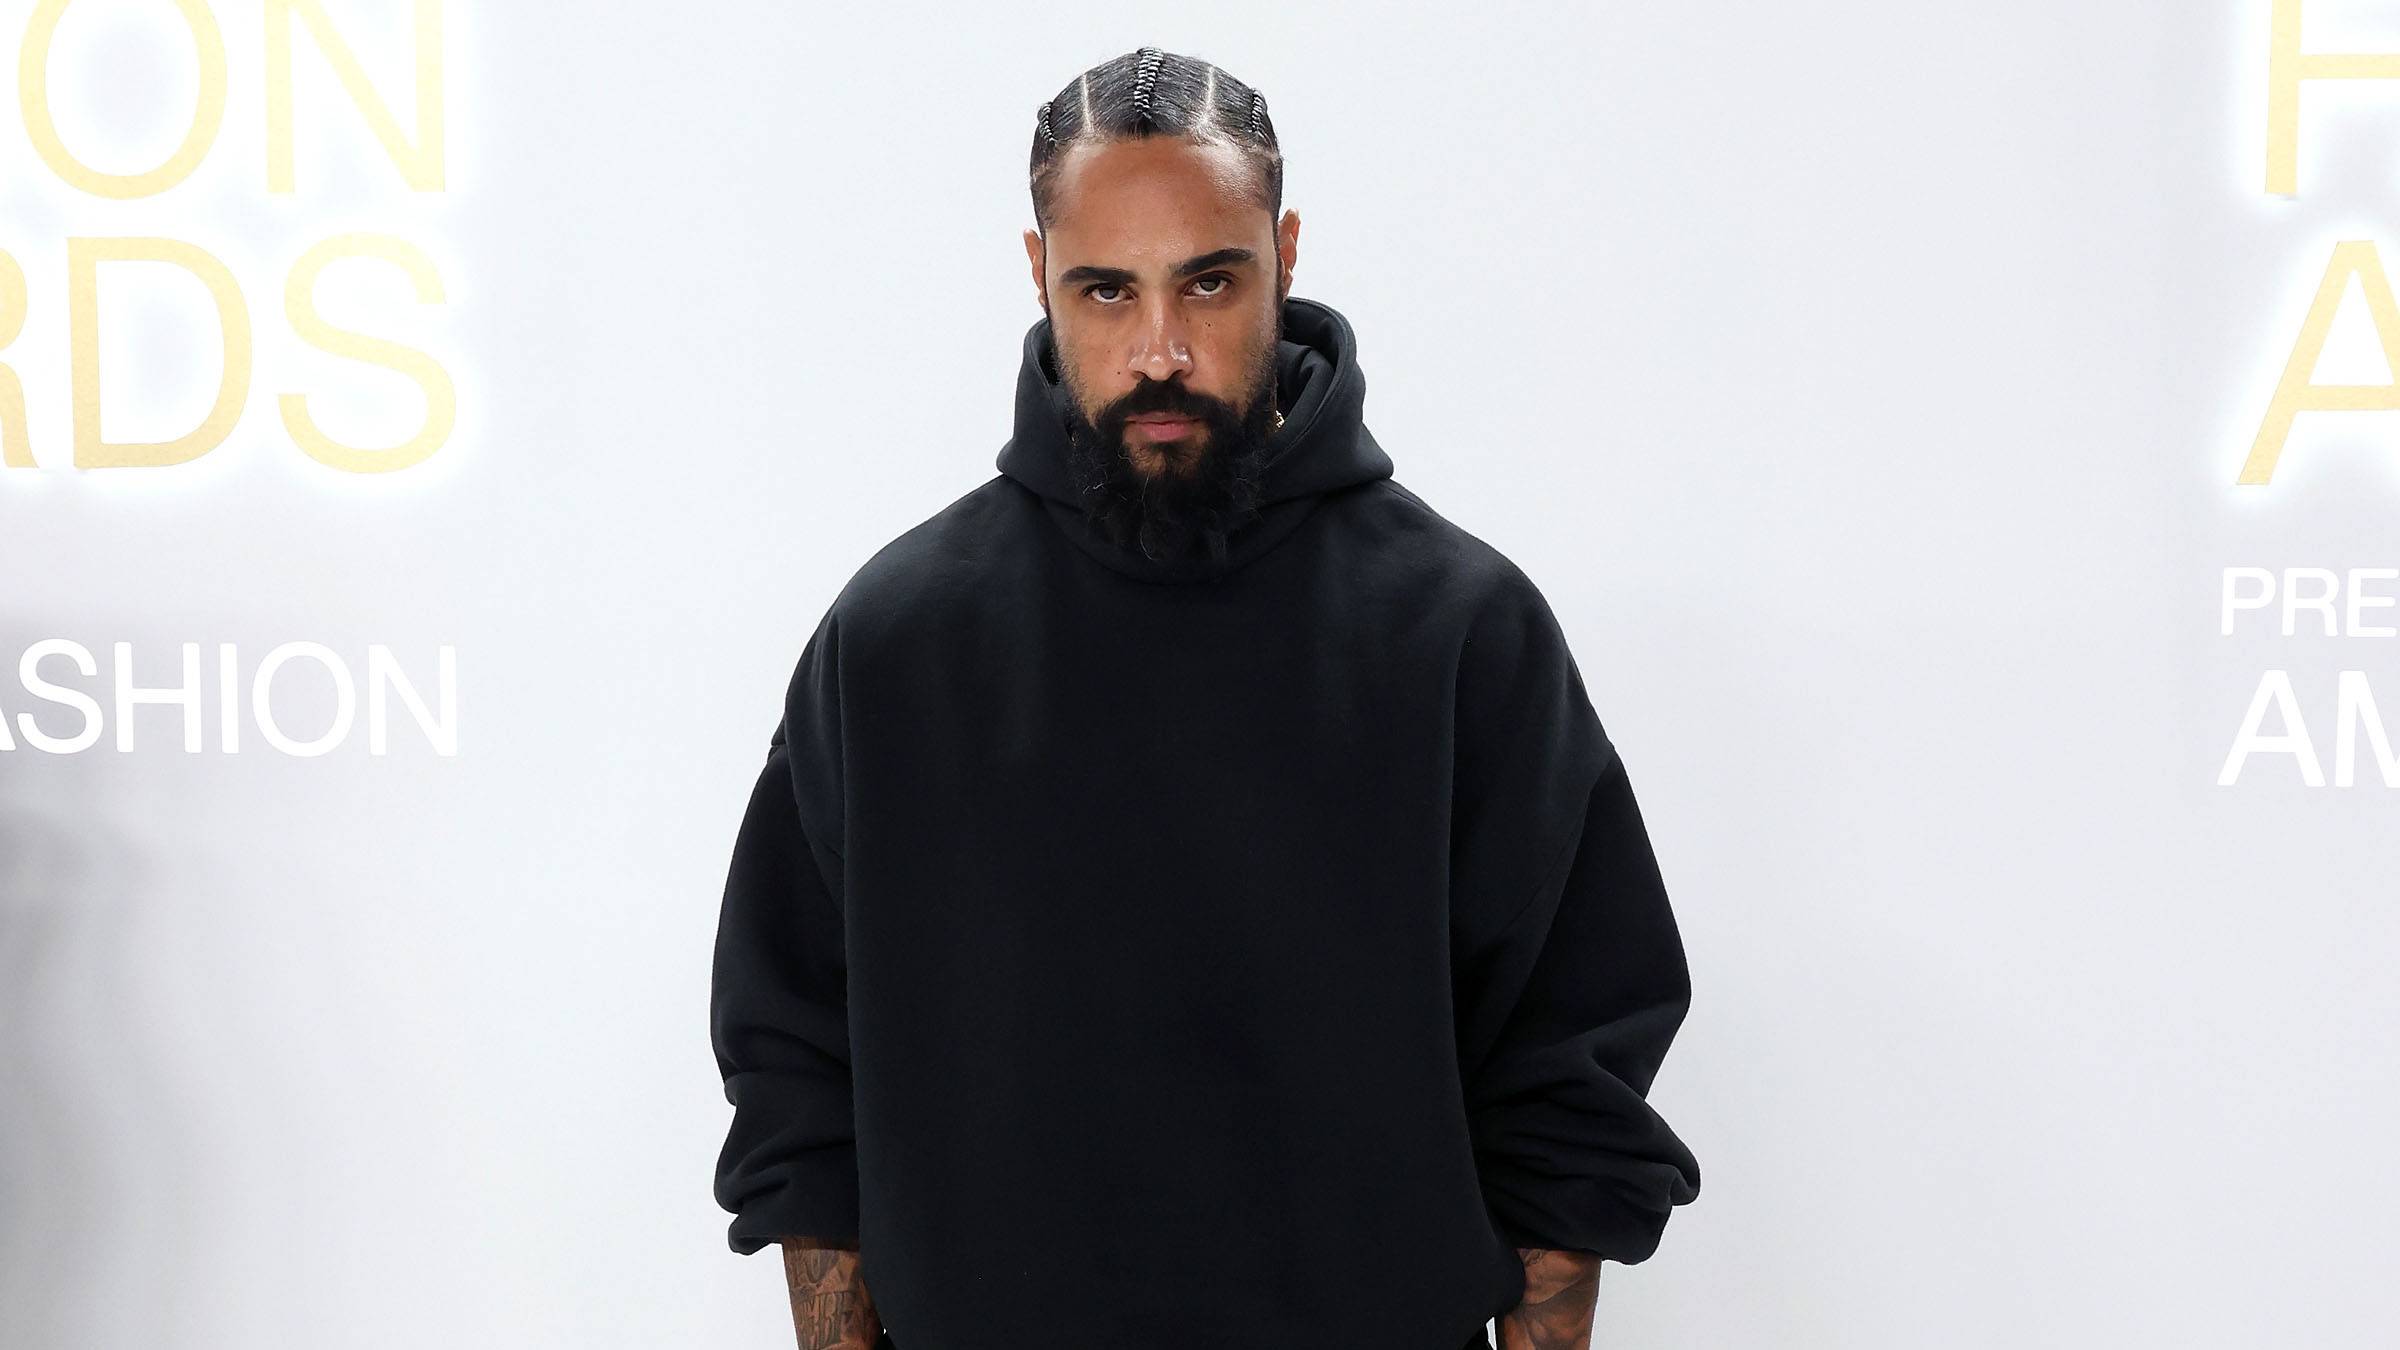 Jerry Lorenzo Previews Fear of God x Adidas Sneakers